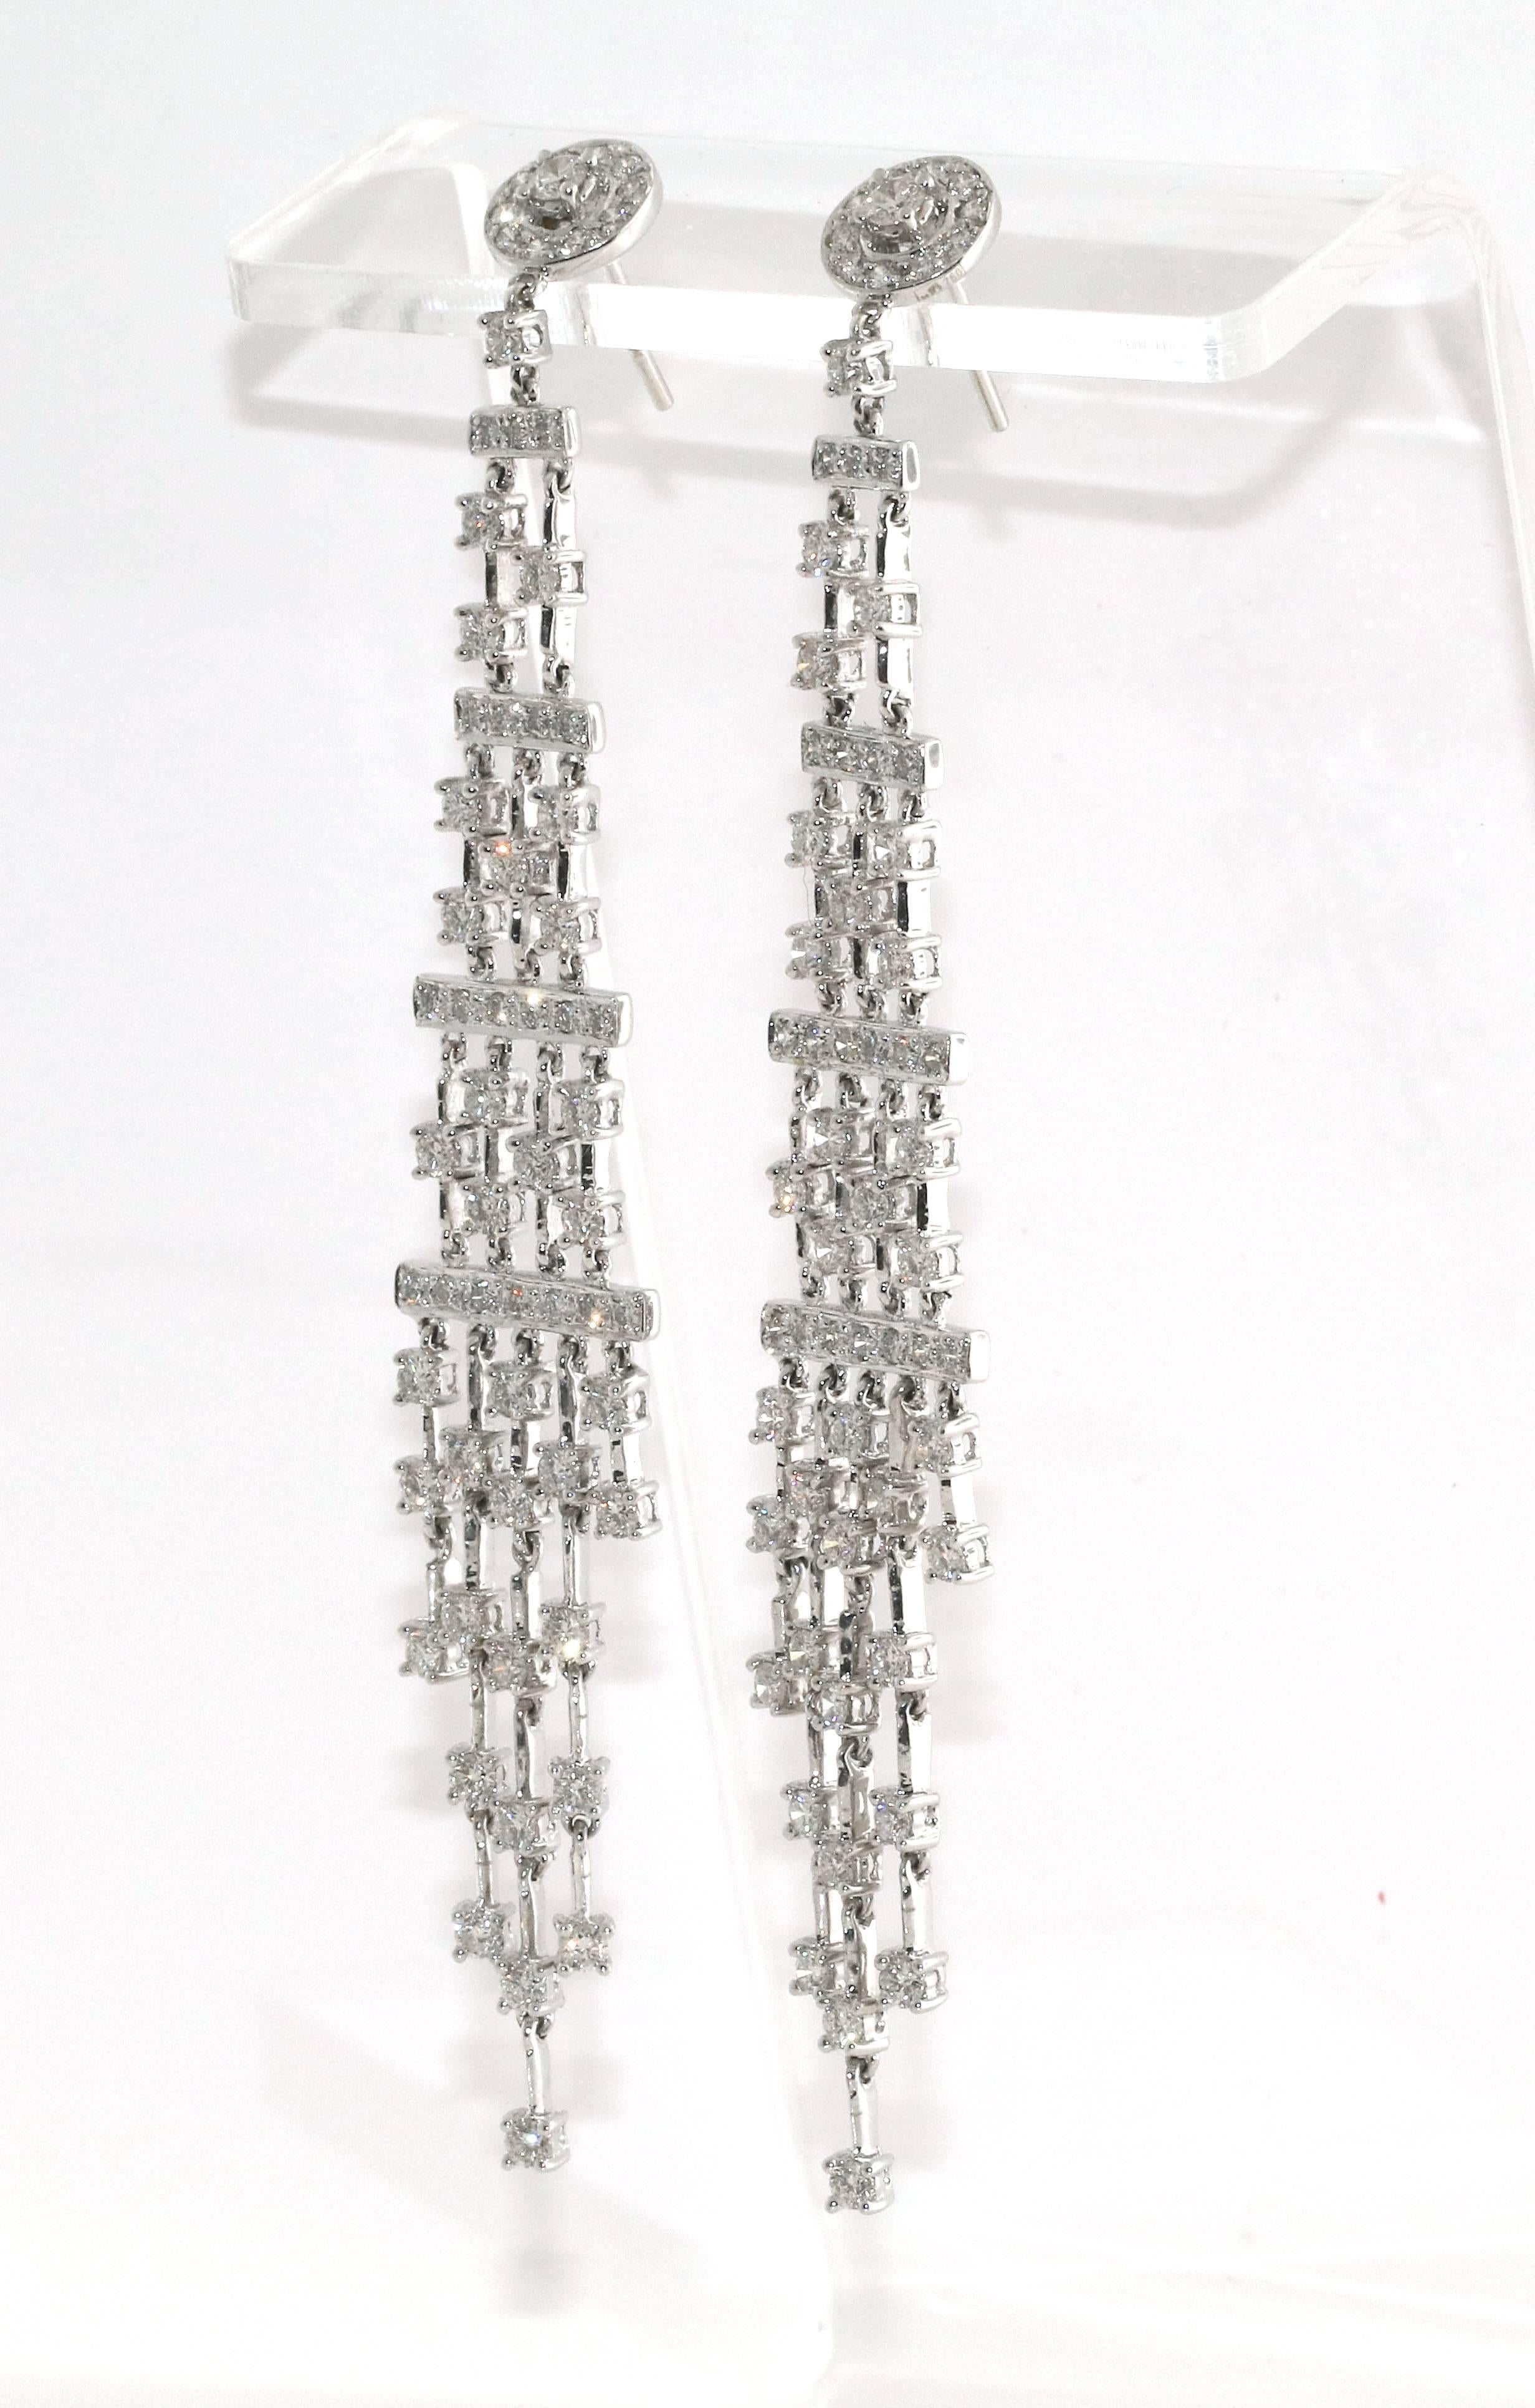 Over 100 diamonds adorn this gorgeous pair of chandelier style dangle earrings. Each column of diamonds moves individually giving it a very unique look. This also allows them to sparkle much more than if they were still.  There are approximately